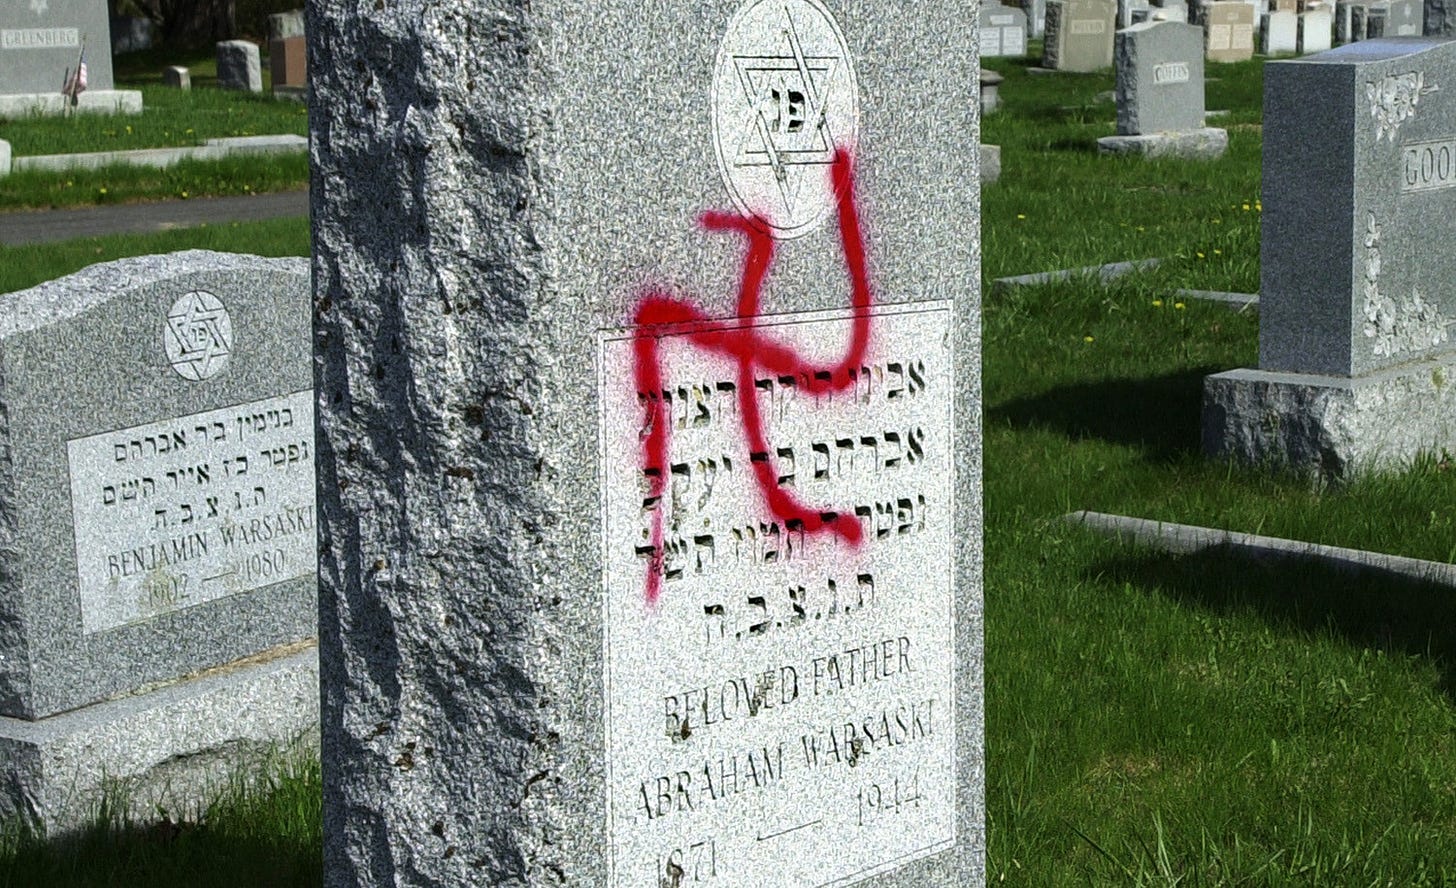 Image of a swastika spray painted onto a gravestone with a Star of David and Hebrew script